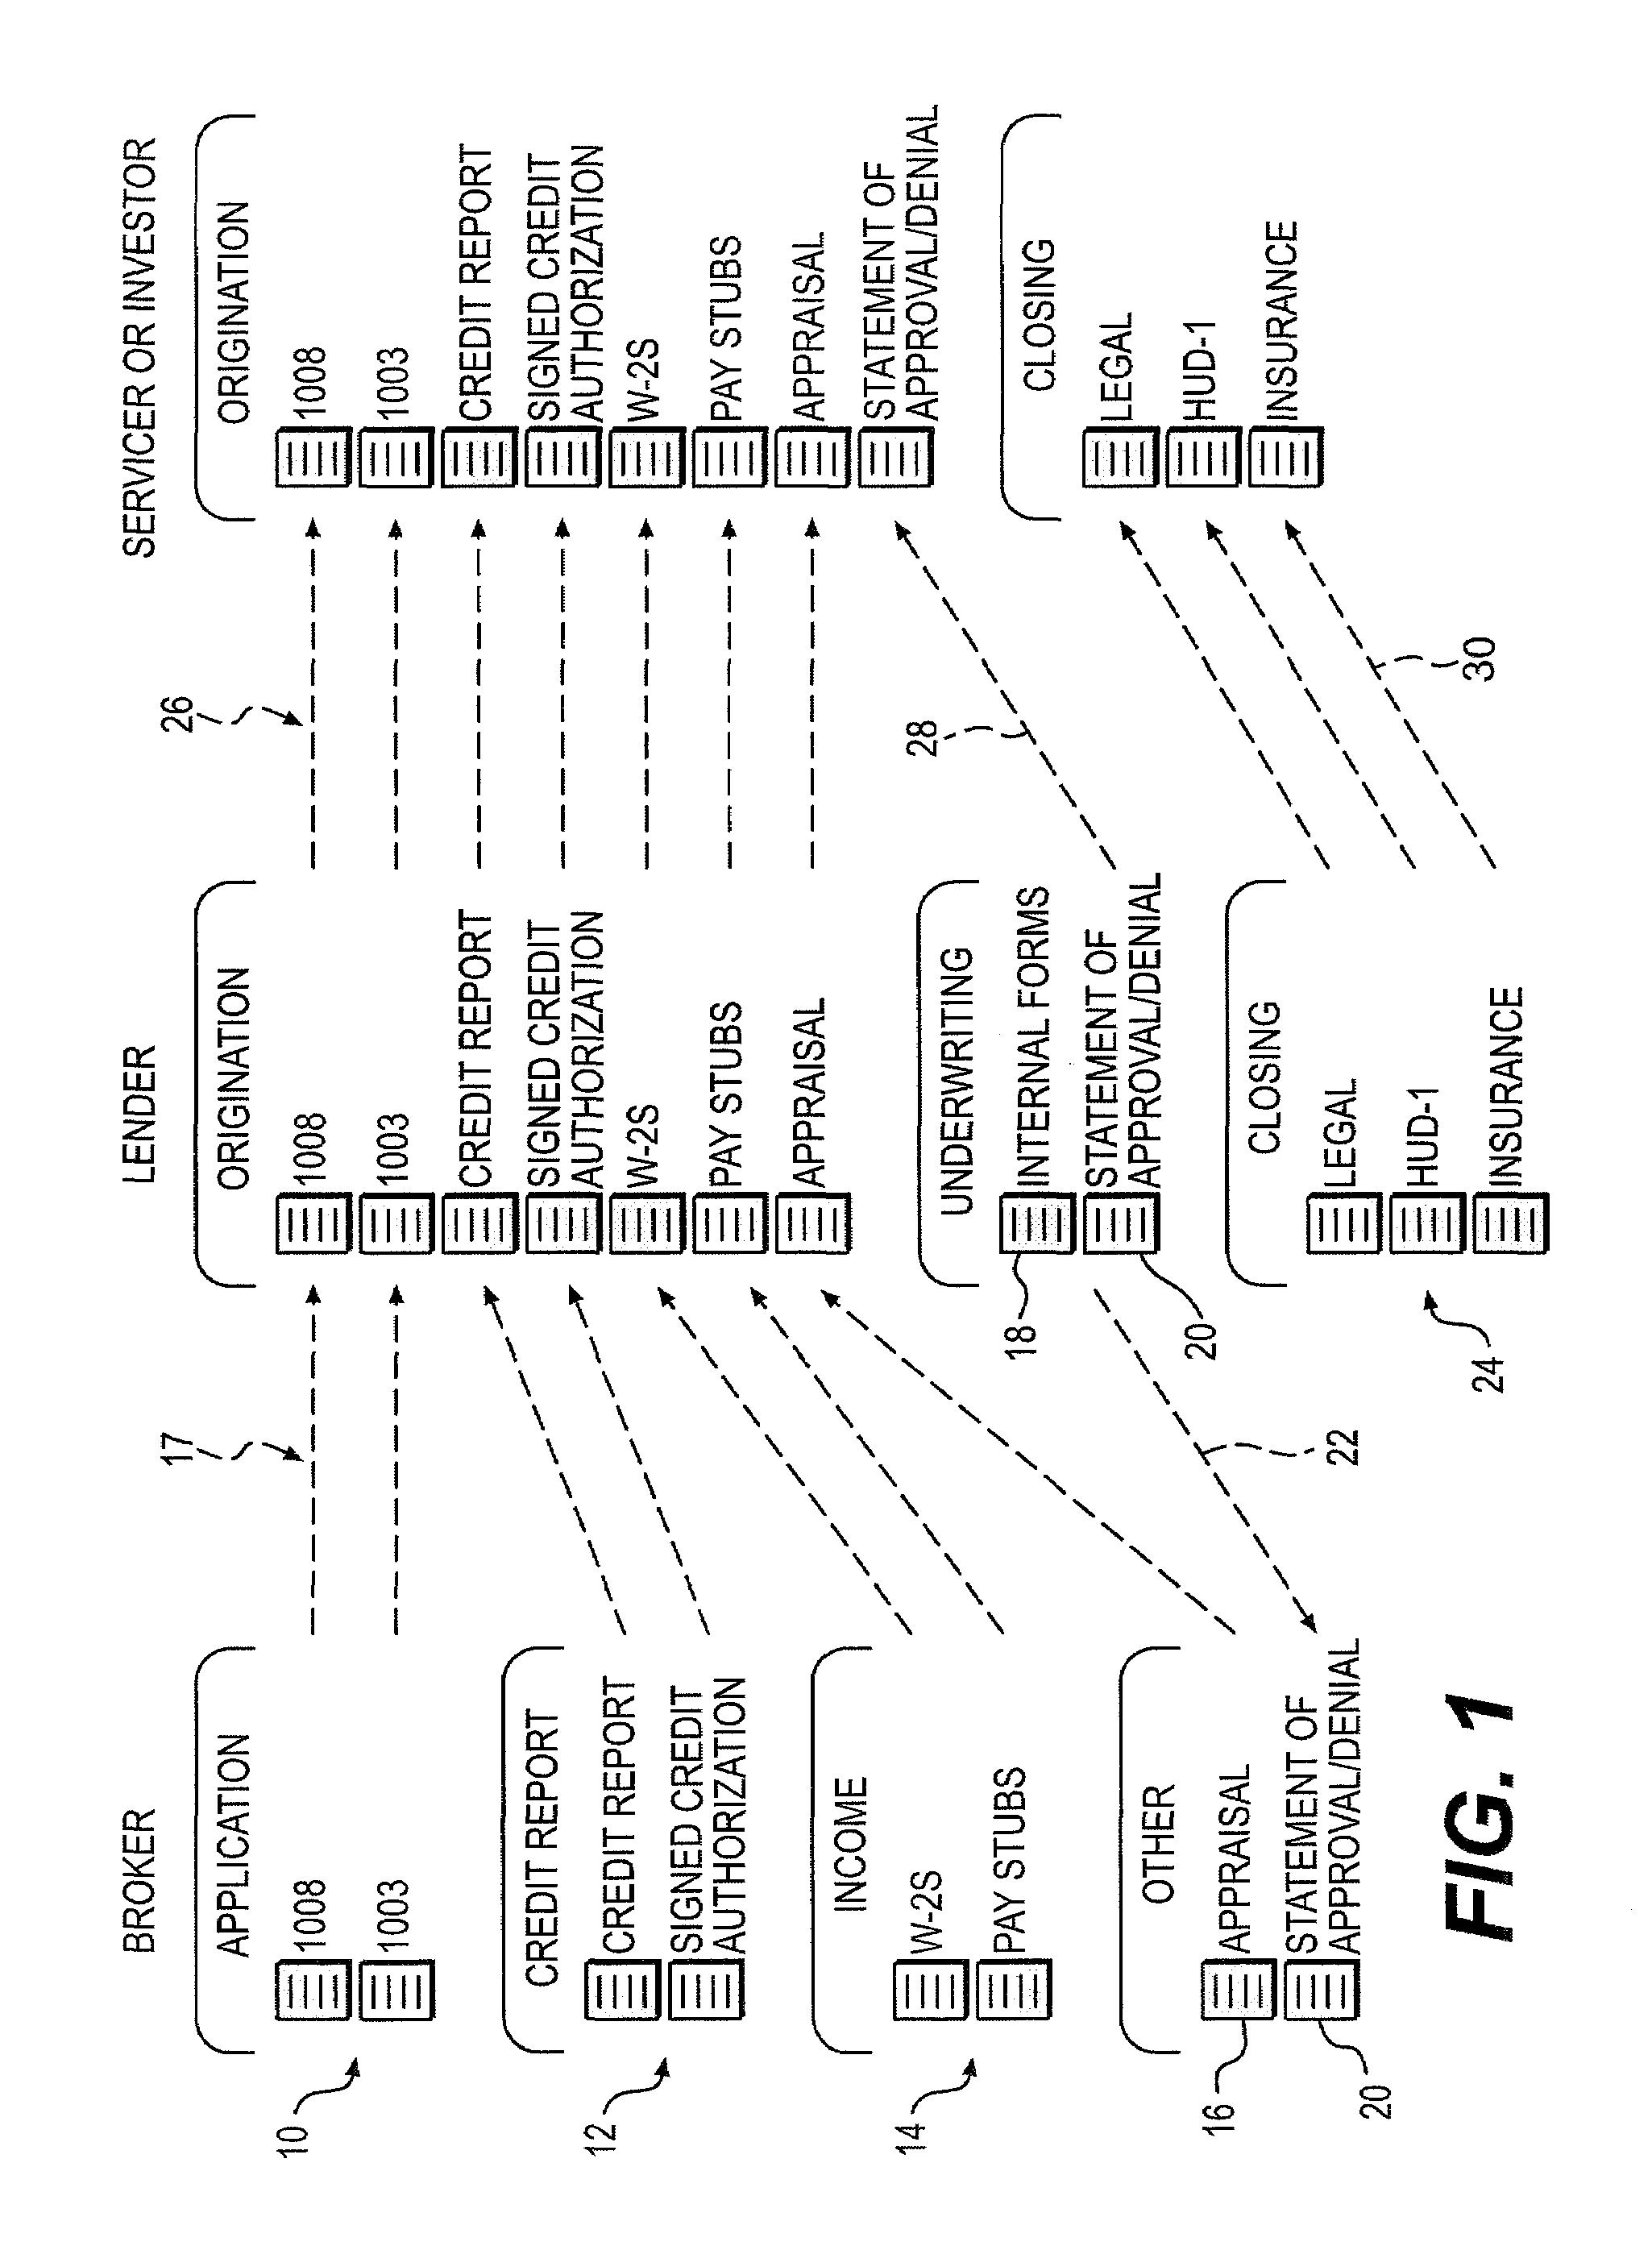 Document management system and method